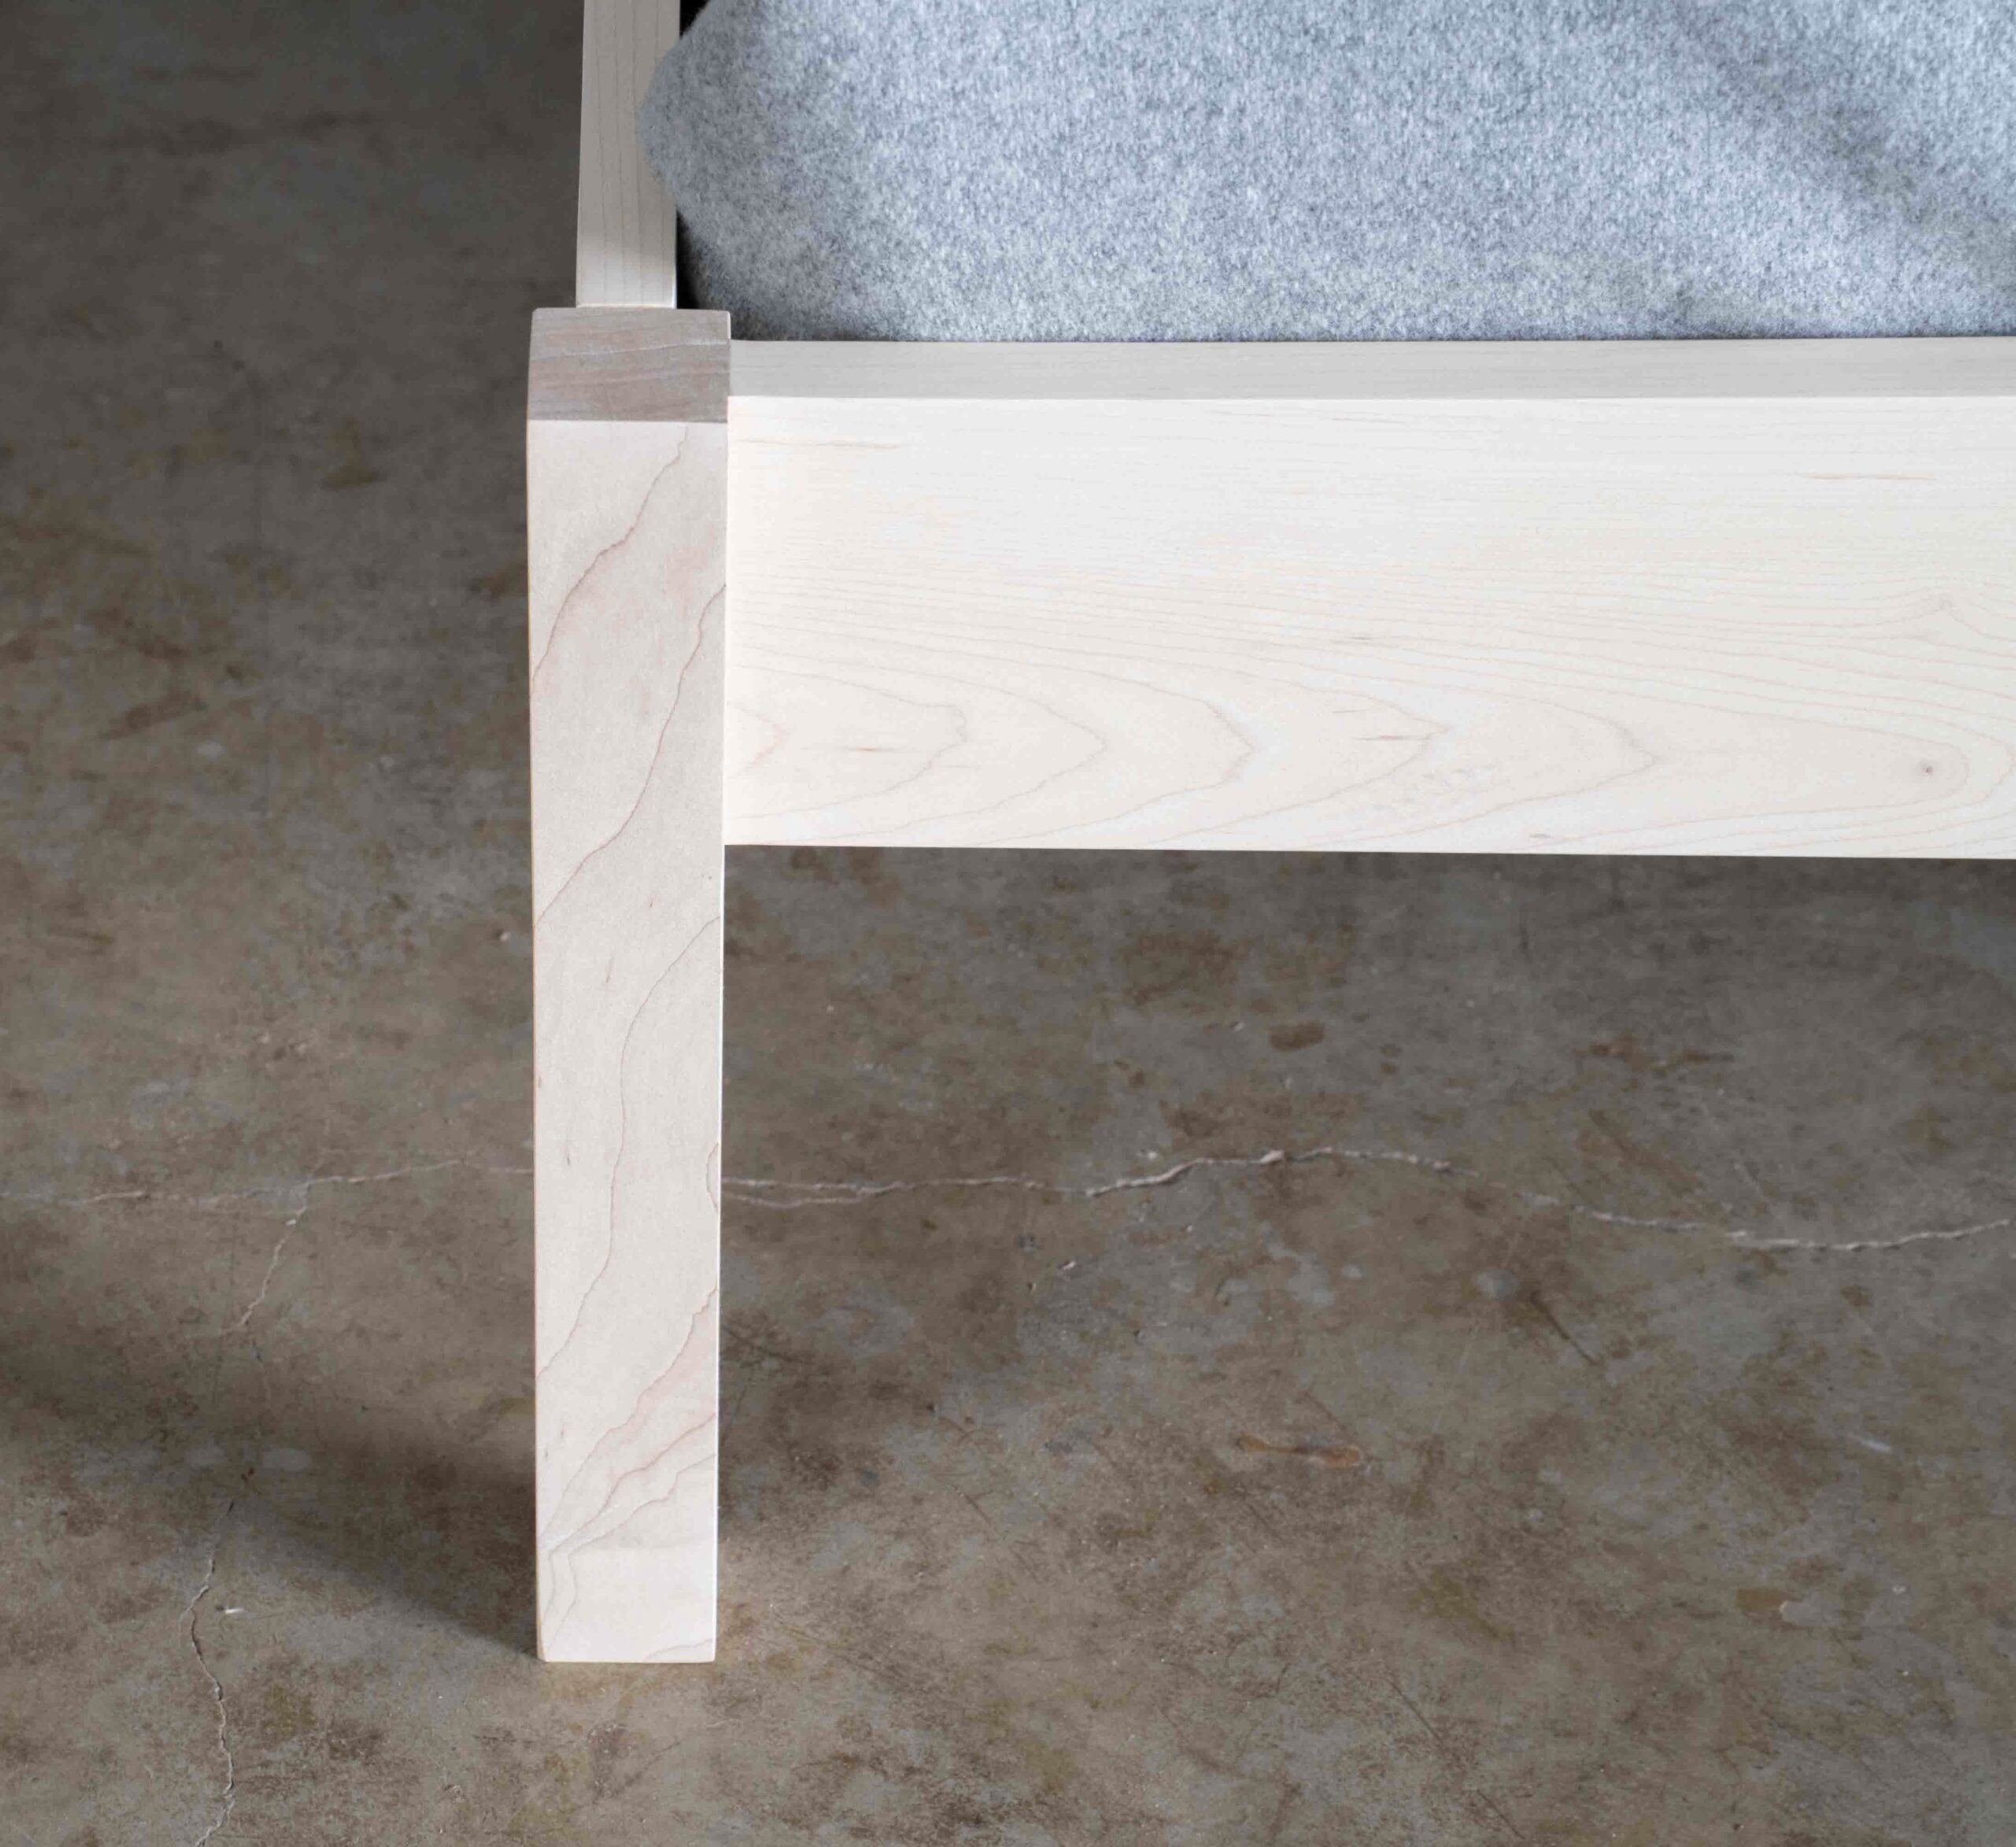 A closeup of the foot of a simple platform bed made of maple.